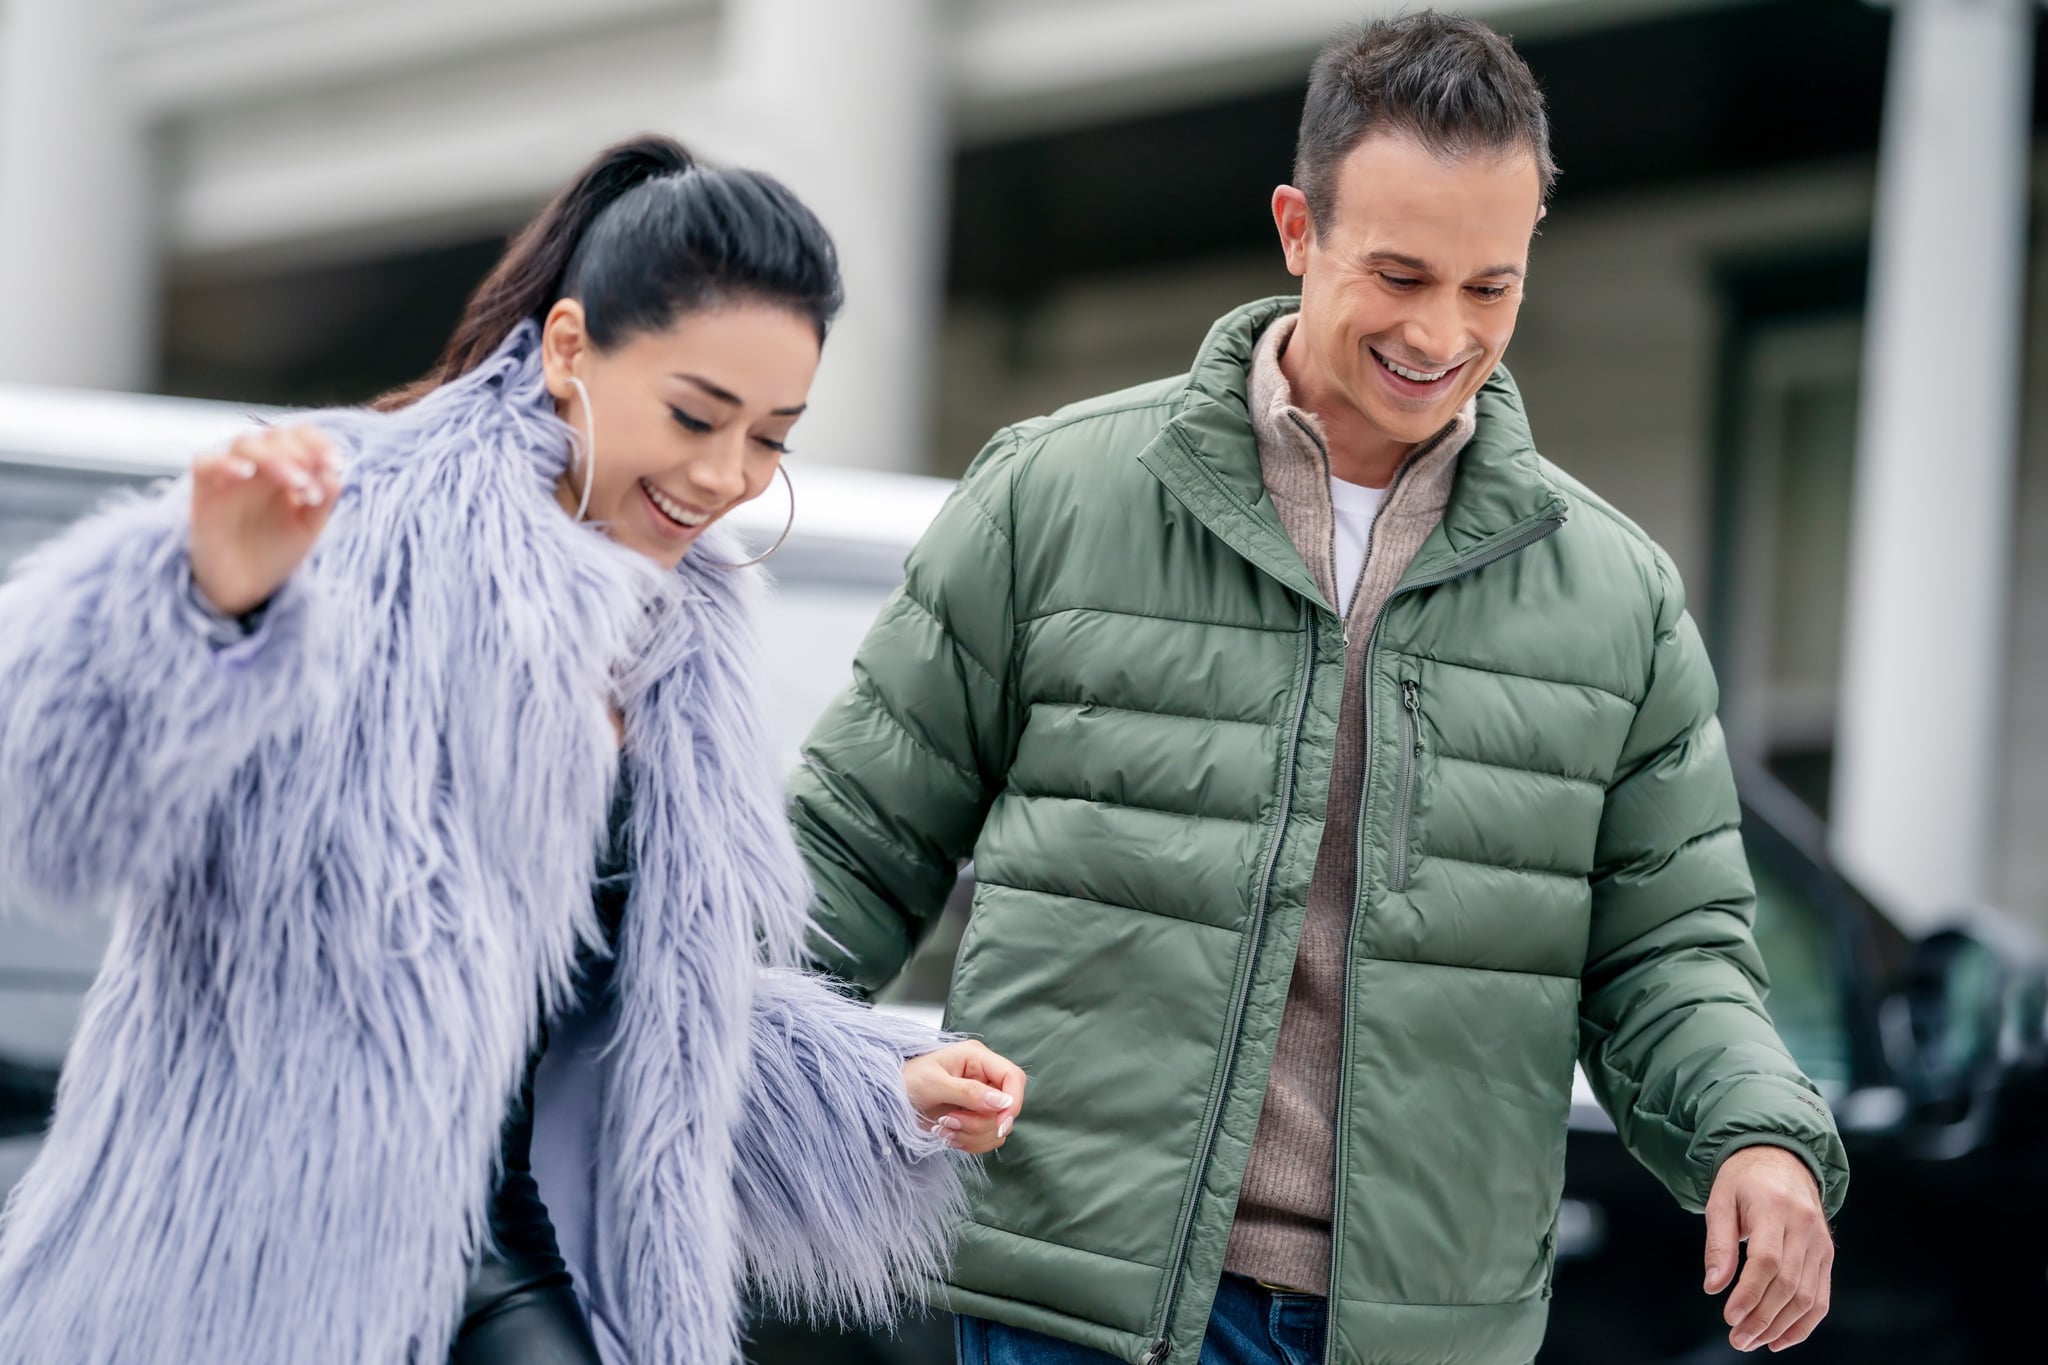 CHRISTMAS WITH YOU, from left: Aimee Garcia, Freddie Prinze Jr., 2022. ph: Jessica Kourkounis / Netflix / Courtesy Everett Collection